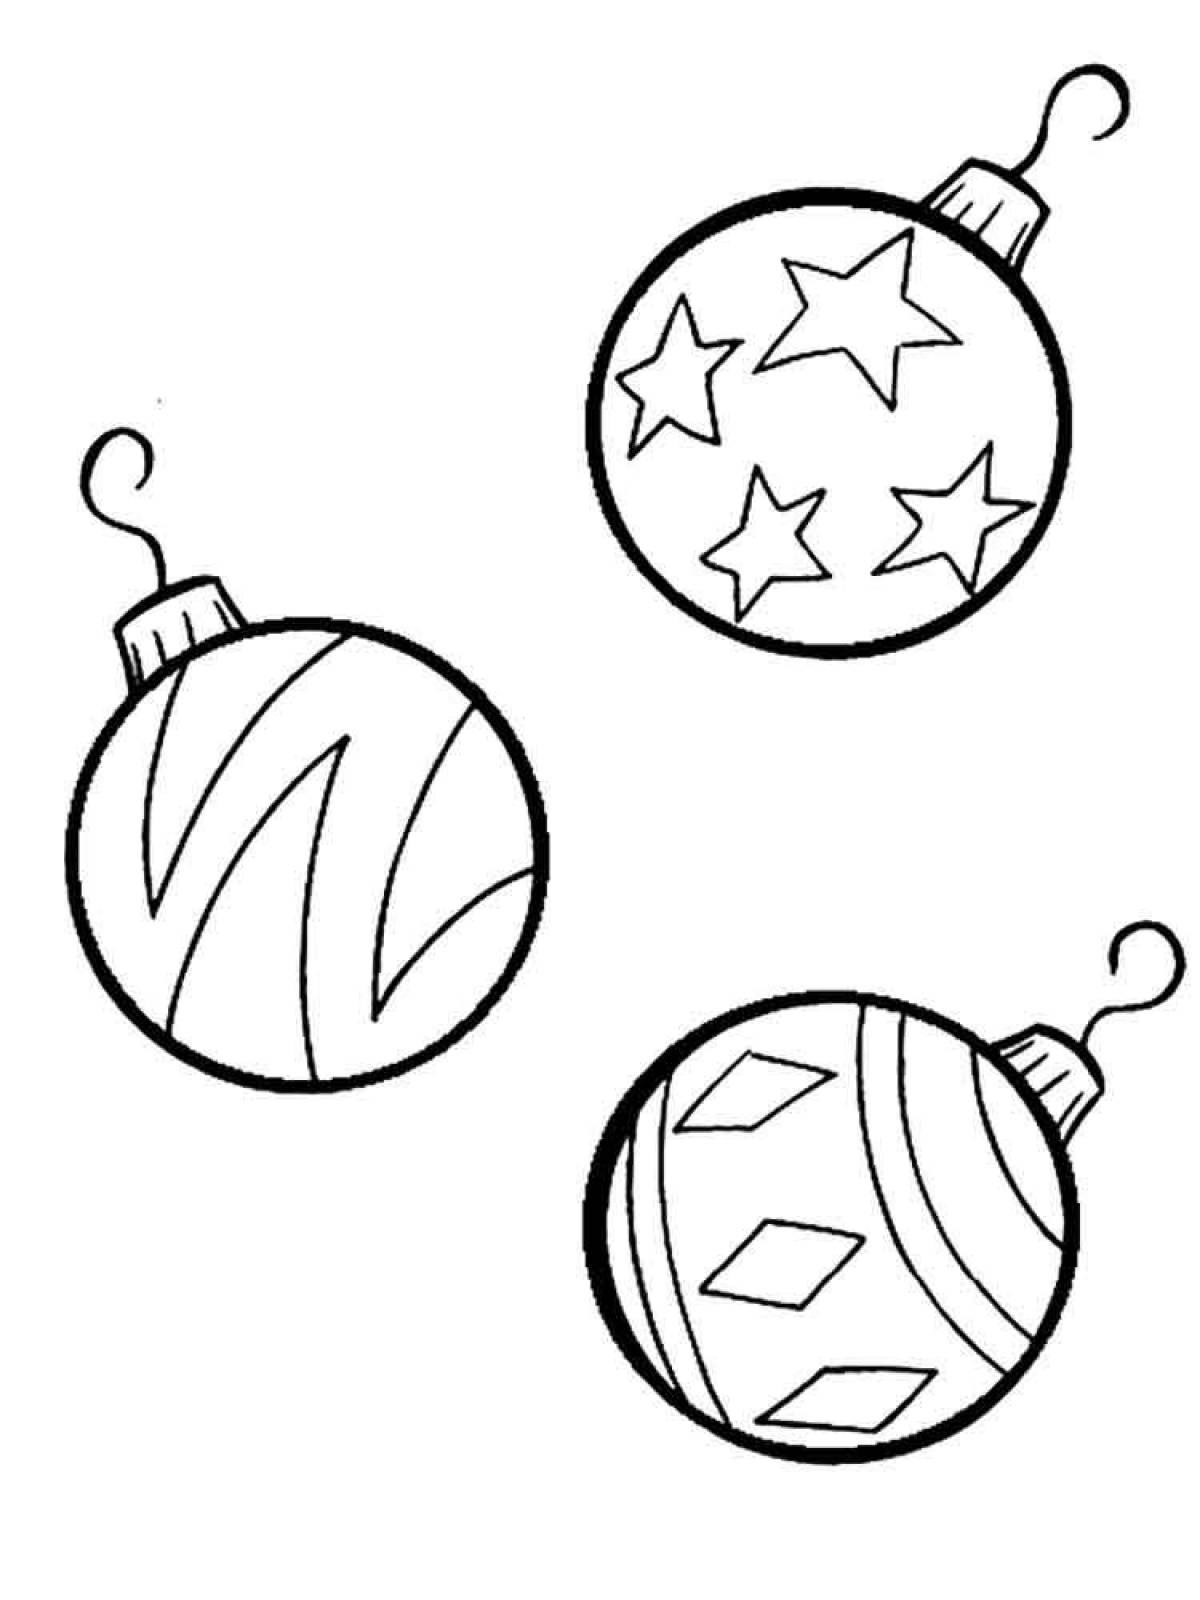 Coloring book glowing Christmas decorations